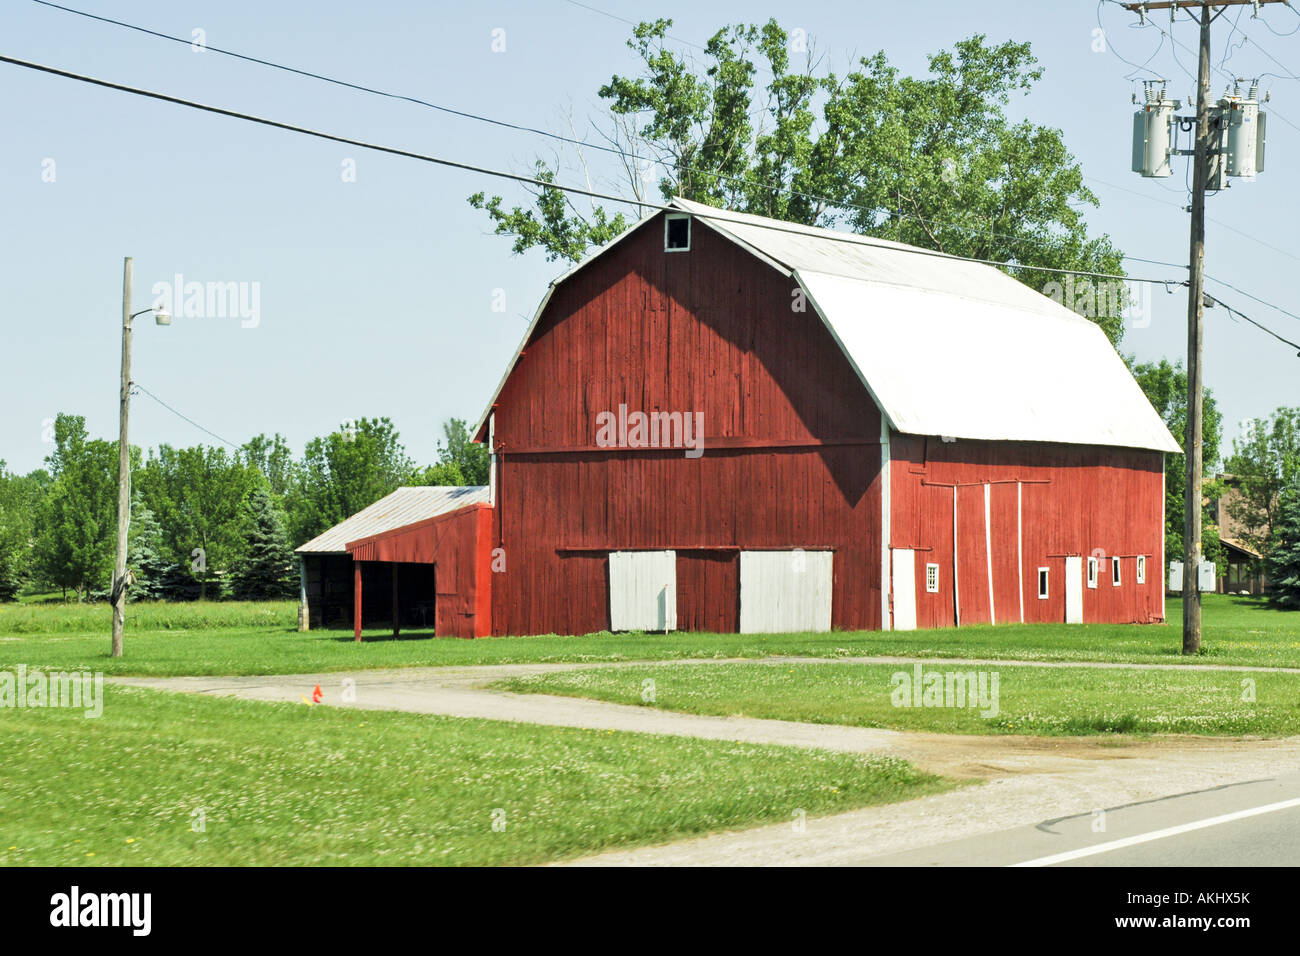 Traditional Dutch style red barn in rural Wisconsin WI Stock Photo